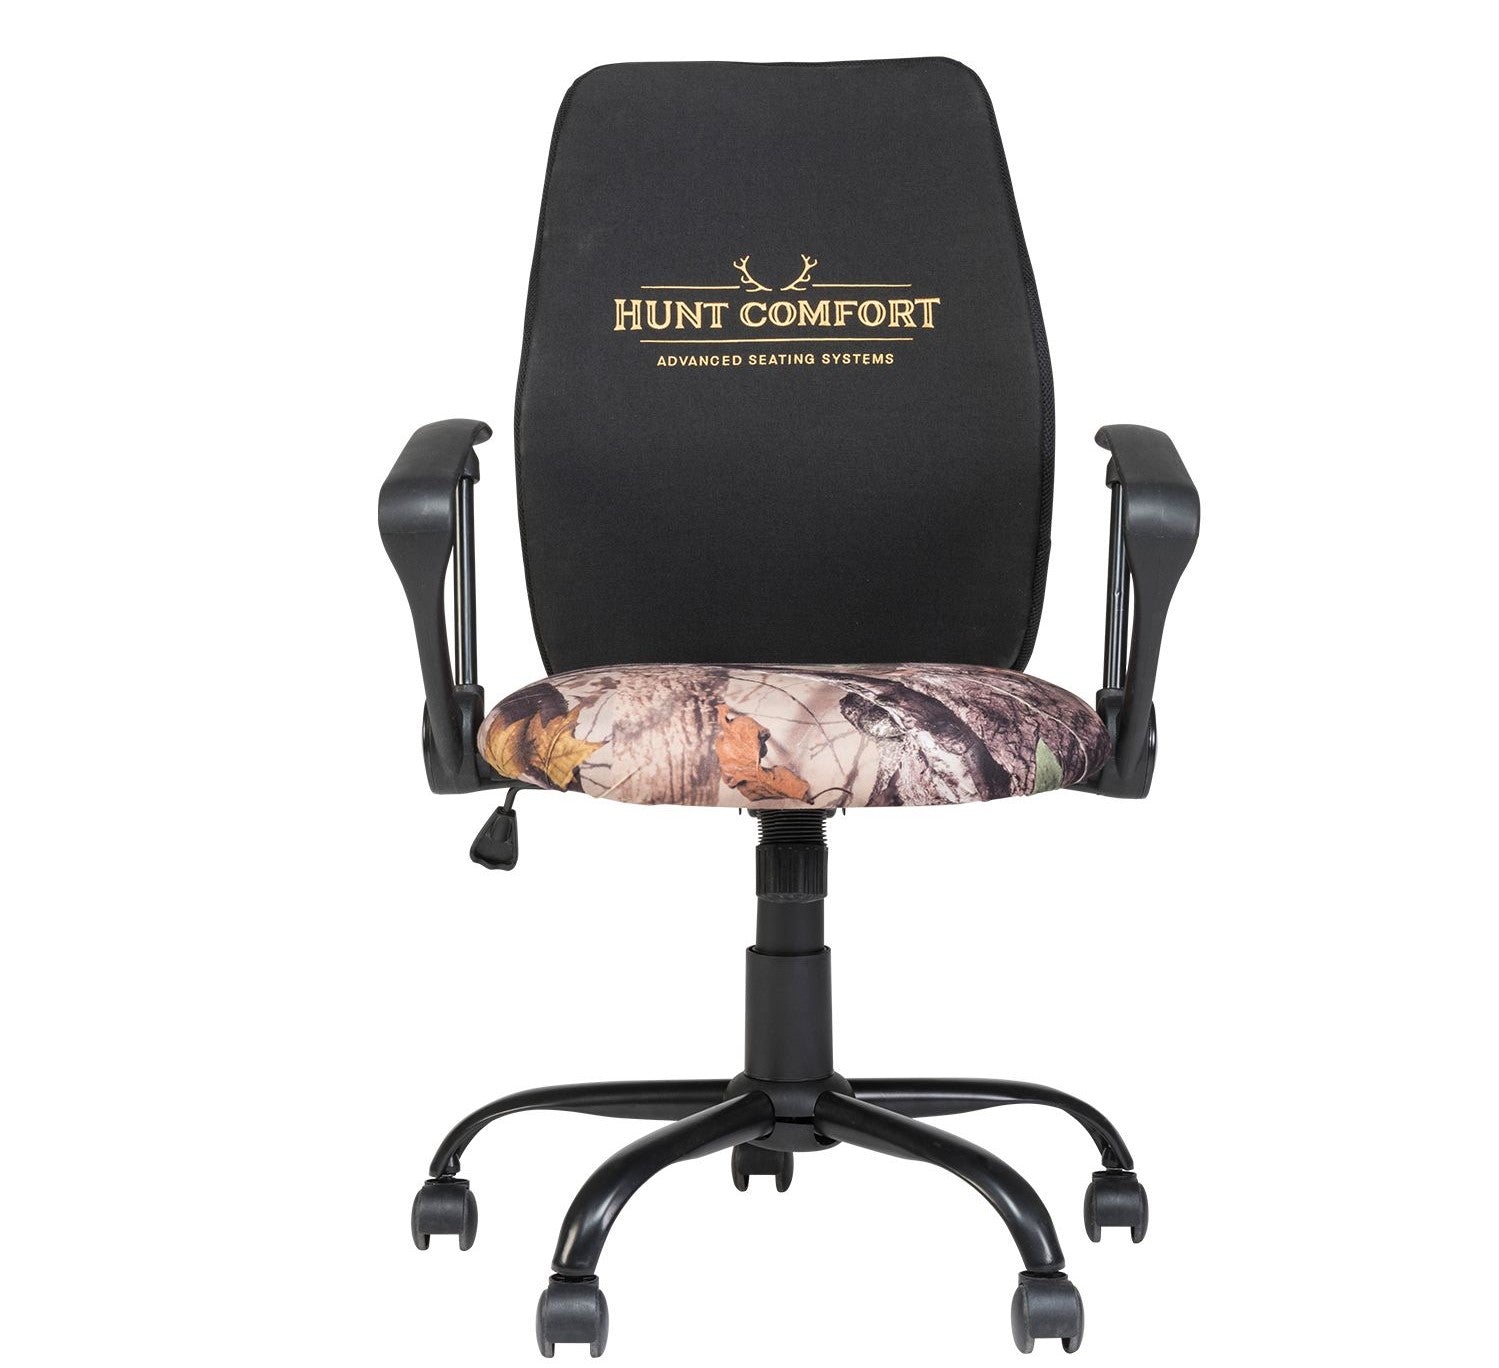 HME FLDSC Folding Seat Hunting Weather Resistant Camo Hunter Chair Cushion  888151018538